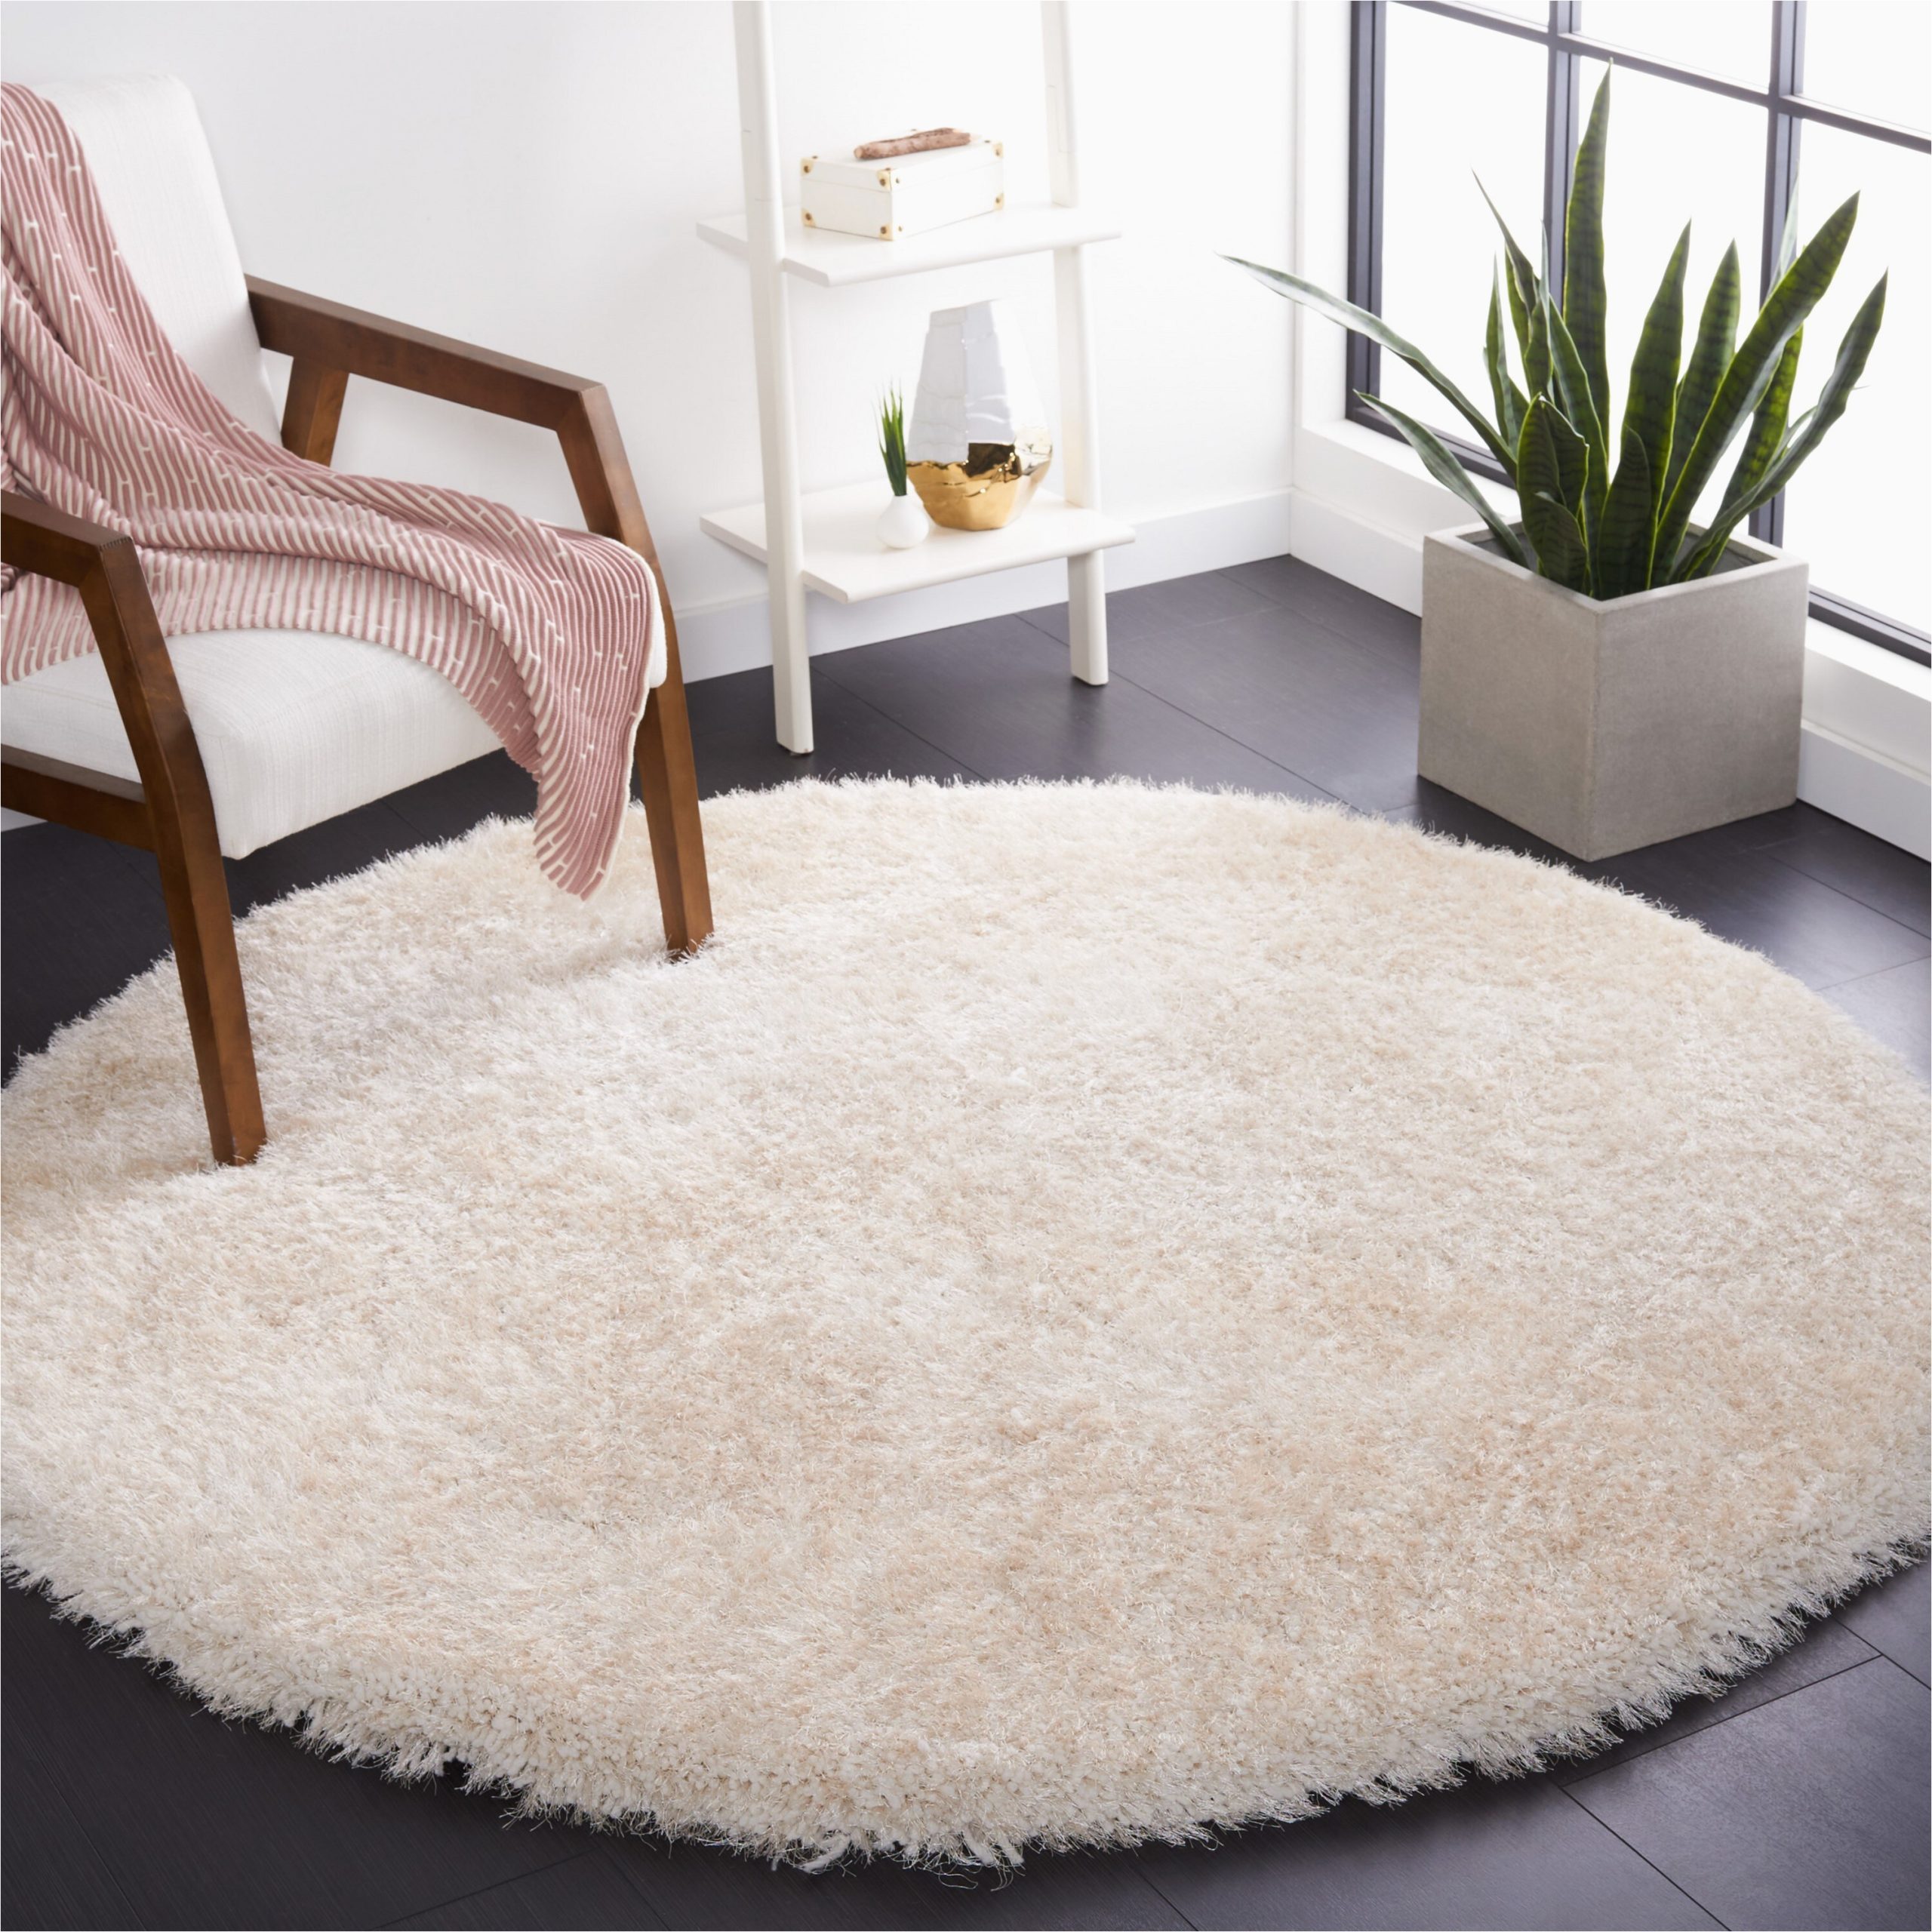 Bilton Hand Tufted Ivory area Rug Safavieh Luxe Shag 6 X 6 Bone Round Indoor solid area Rug In the …